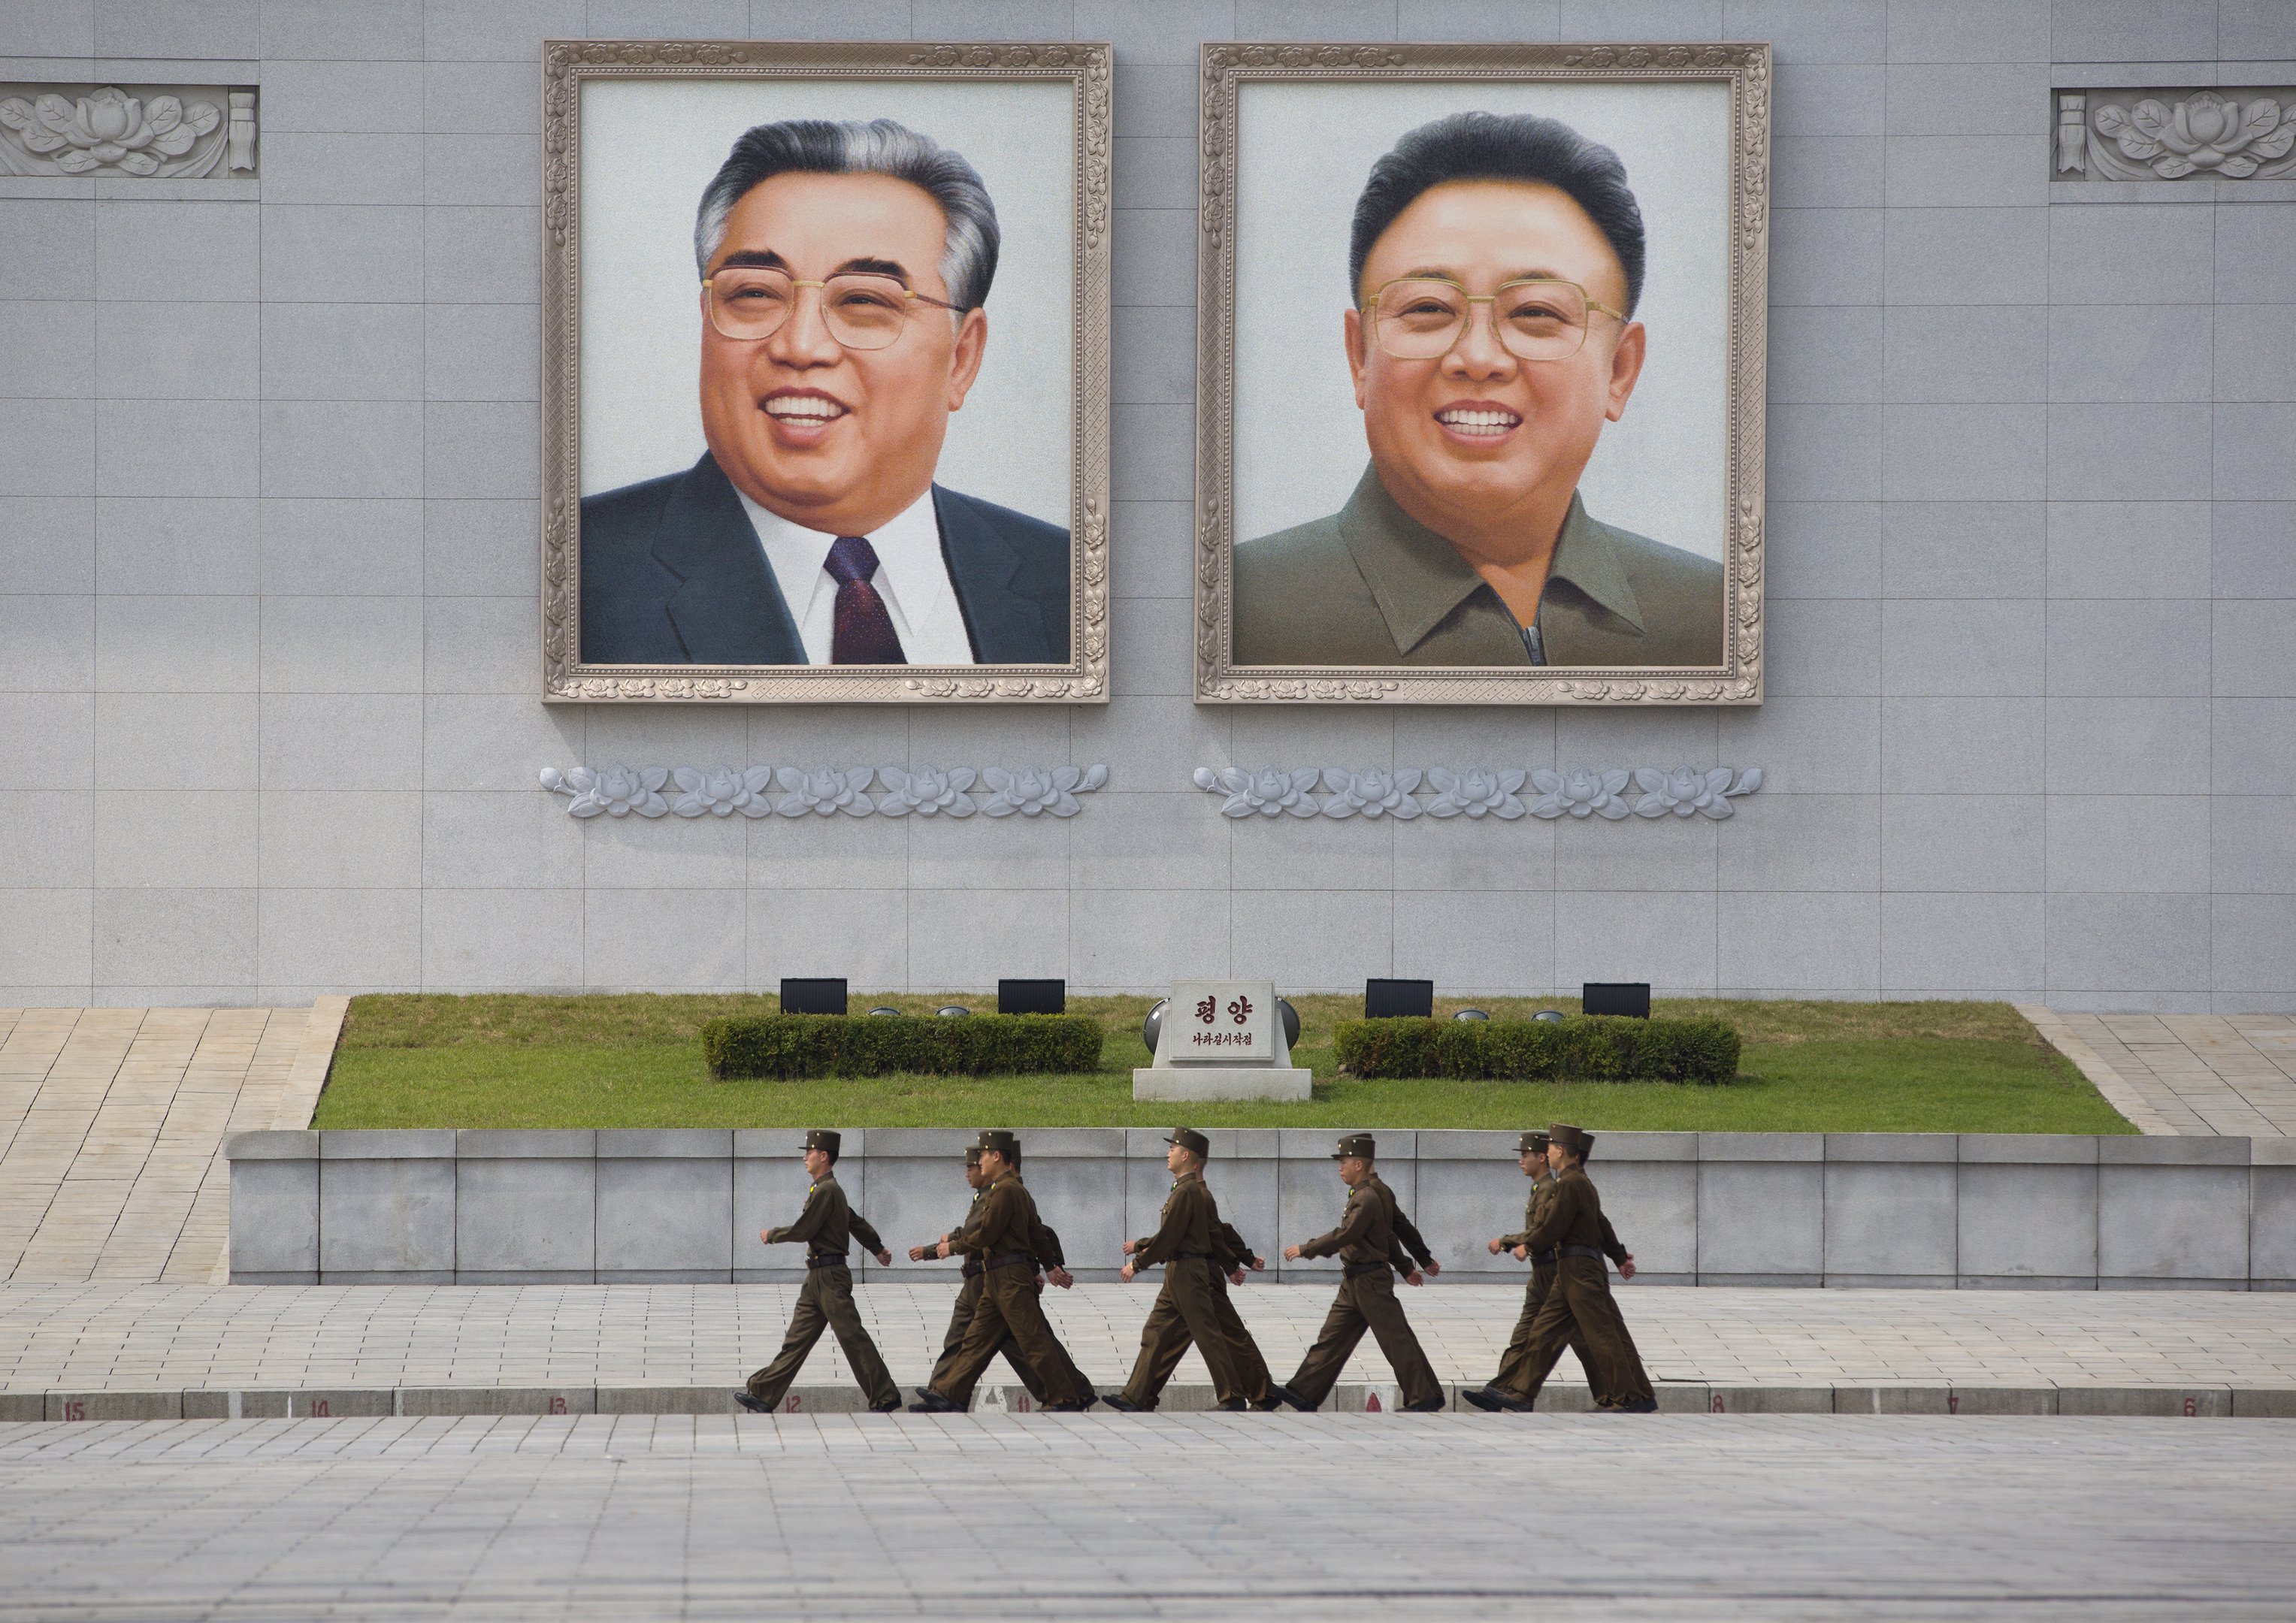 PYONGYANG, NORTH KOREA - SEPTEMBER 09: North korean people army soldiers passing in front of kim il sung and kim jong il giant portraits on kim il sung square, pyongyang, North Korea on September 9, 2012 in Pyongyang, North Korea.